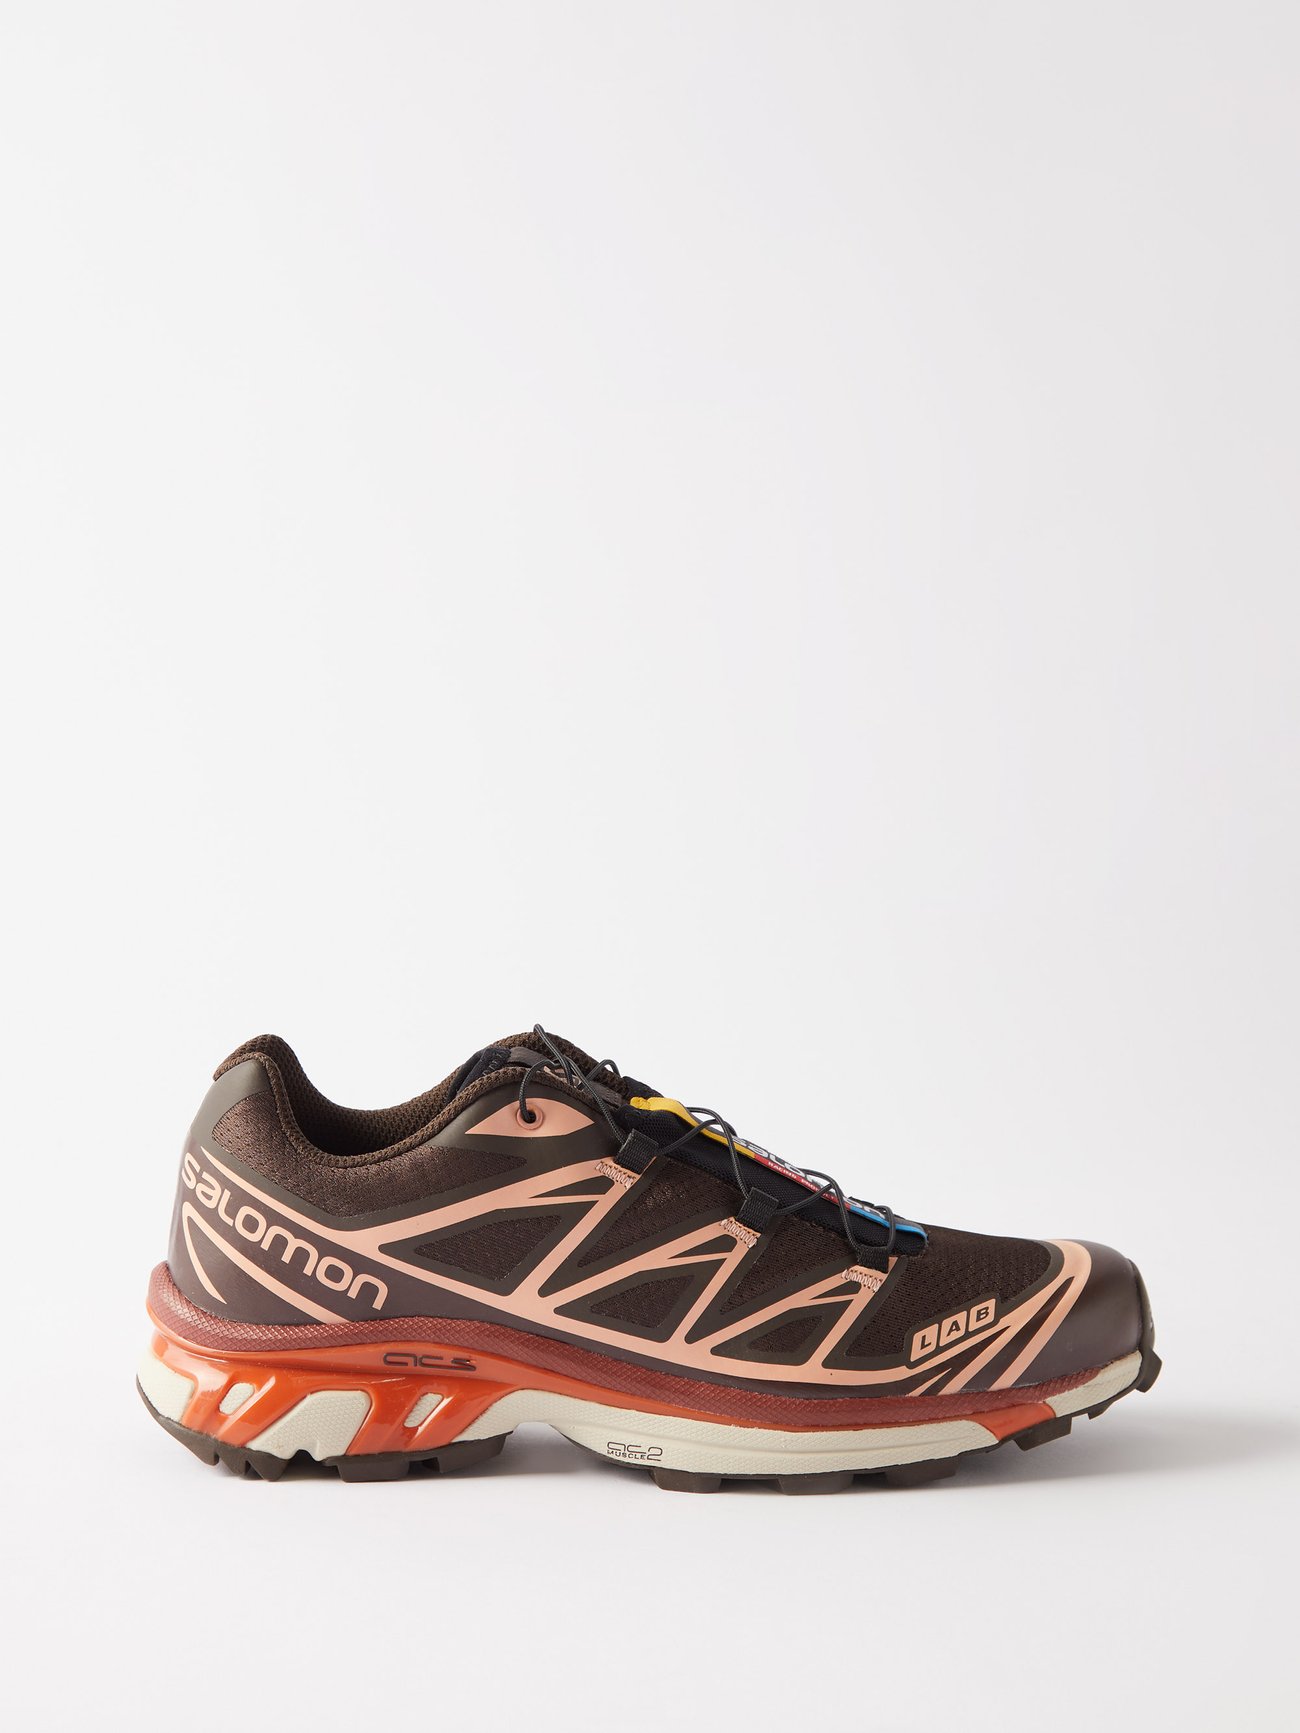 A Salomon classic since 2013, these brown mesh and rubber XT-6 trainers have an OrthoLite insole that moulds to the contours of your feet.